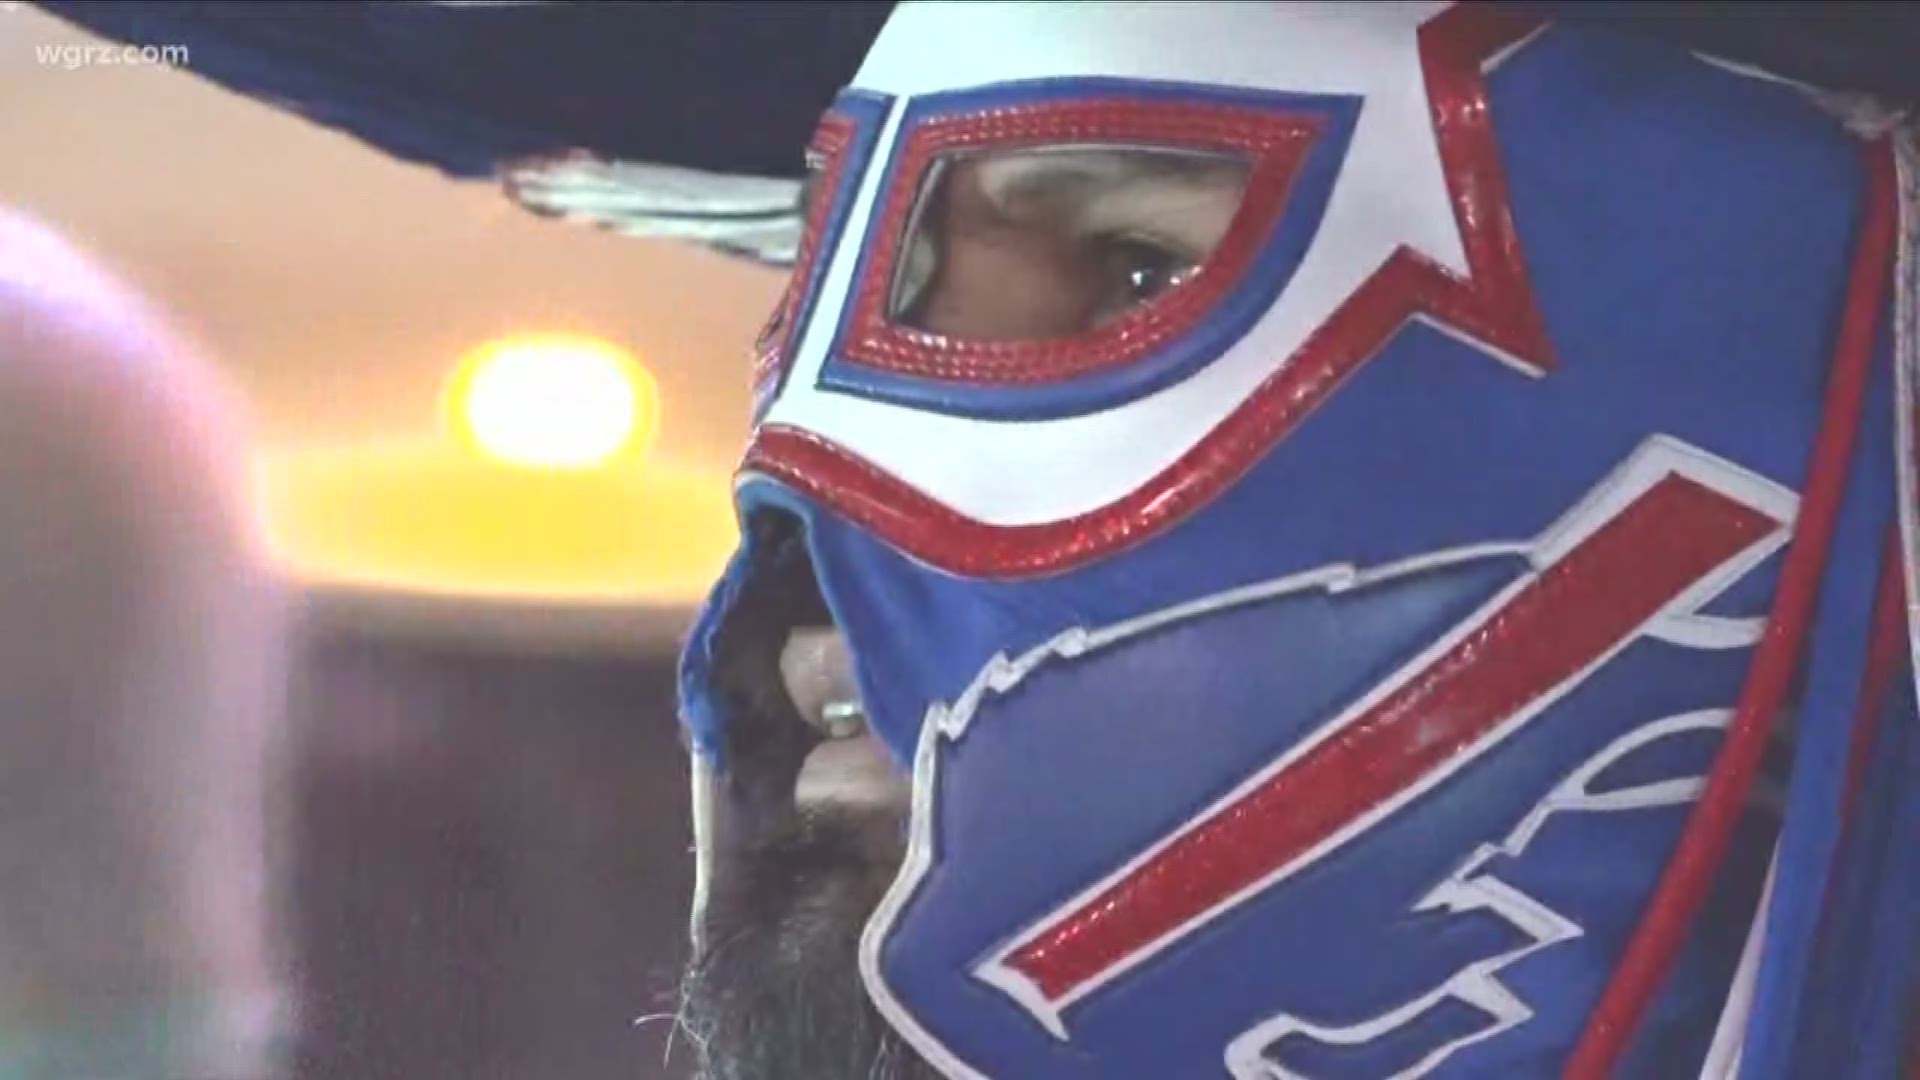 Meet The Mafia heads to Dallas, Texas, the home of Ezra Castro, the man behind the mask of "Pancho Billa," who many fans might call the heart of the Bills Mafia